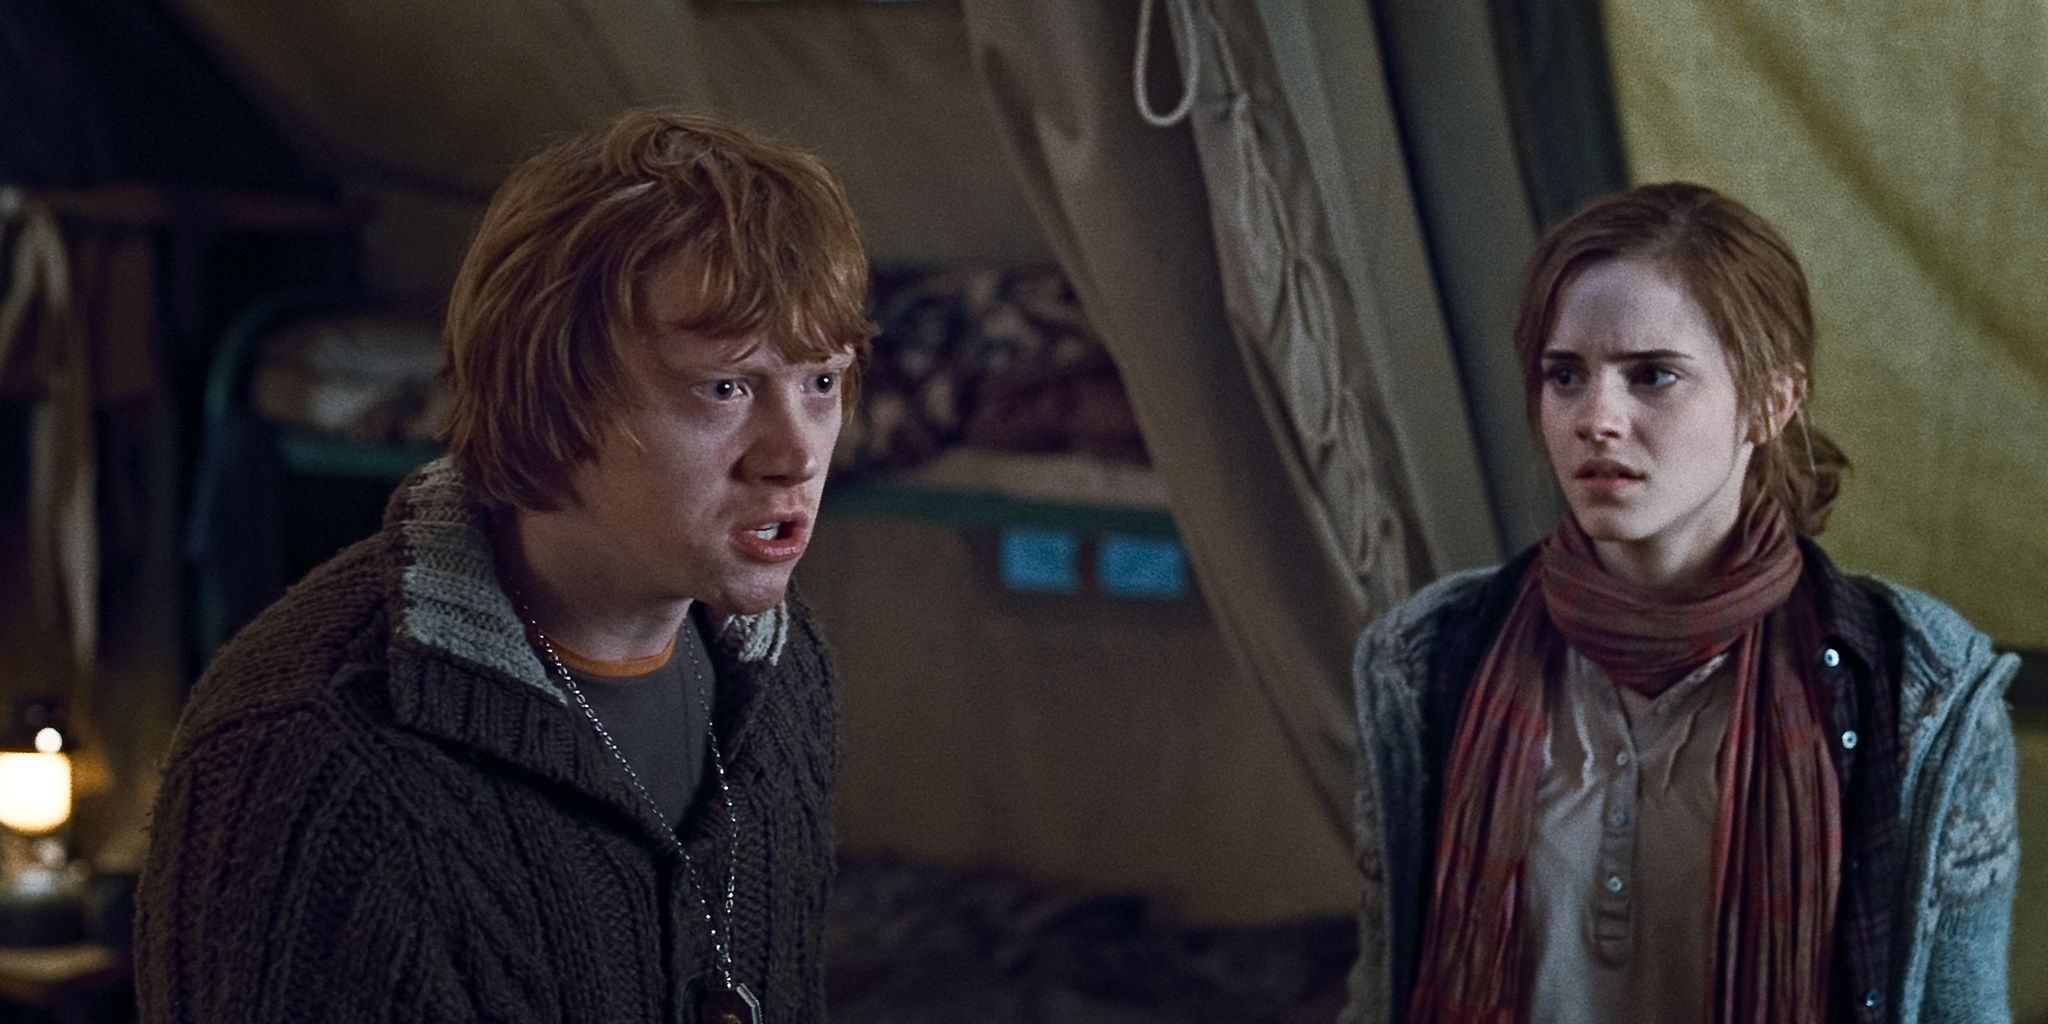 Ron argues with Harry and Hermione in Harry Potter and the Deathly Hallows